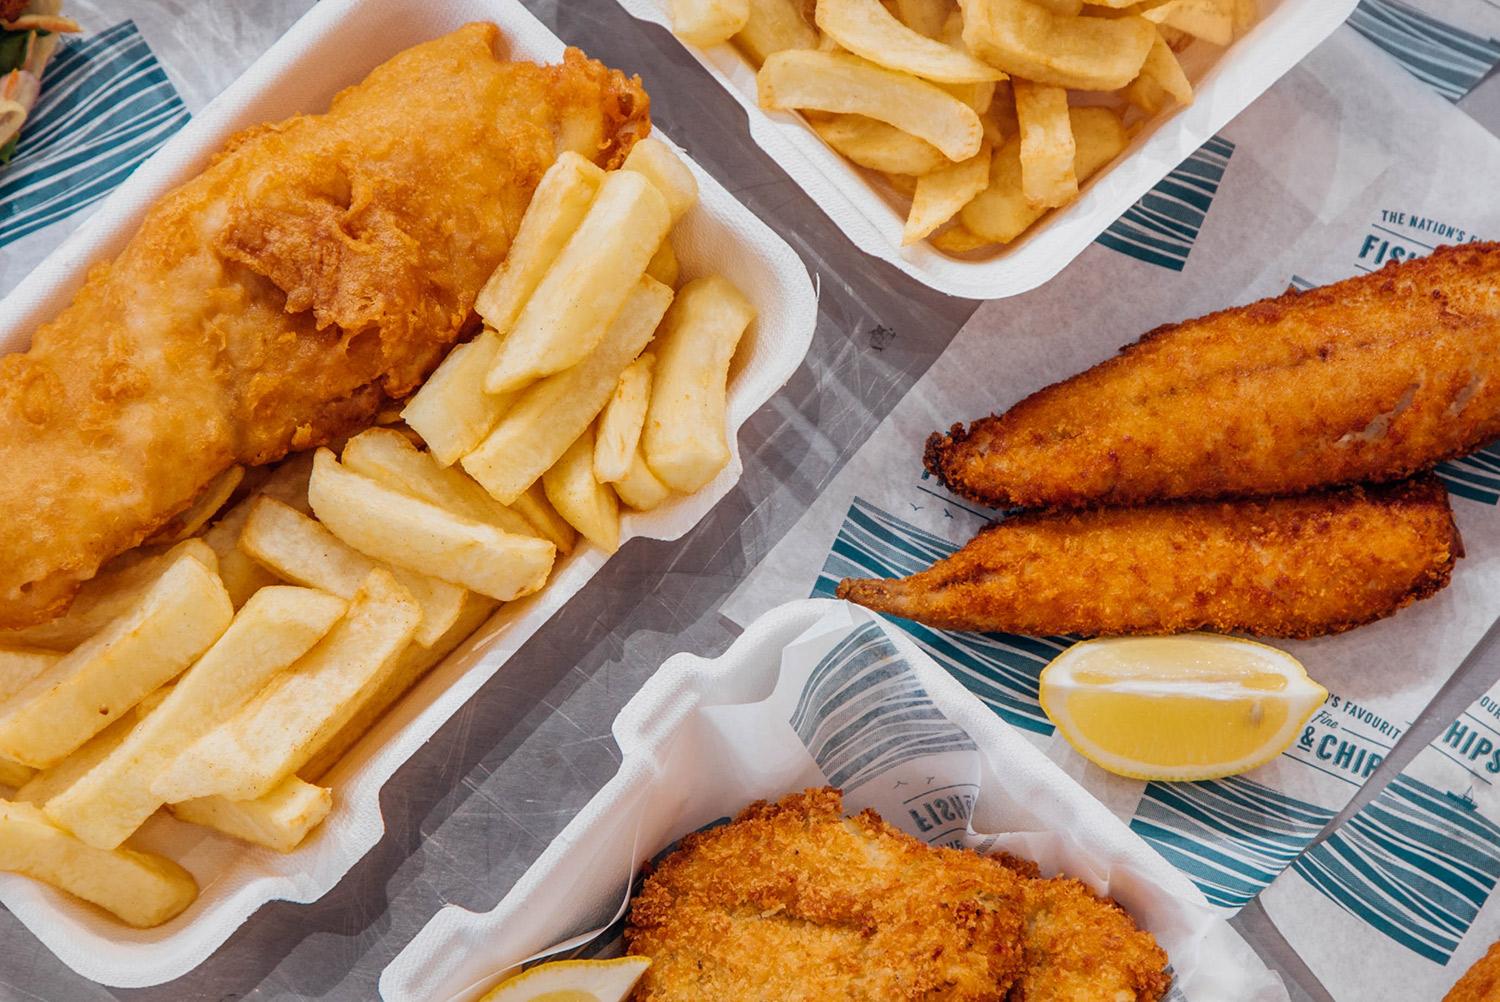 Share Some Dishes With These Celebs and We’ll Reveal Your Celeb Doppelgänger Fish and chips